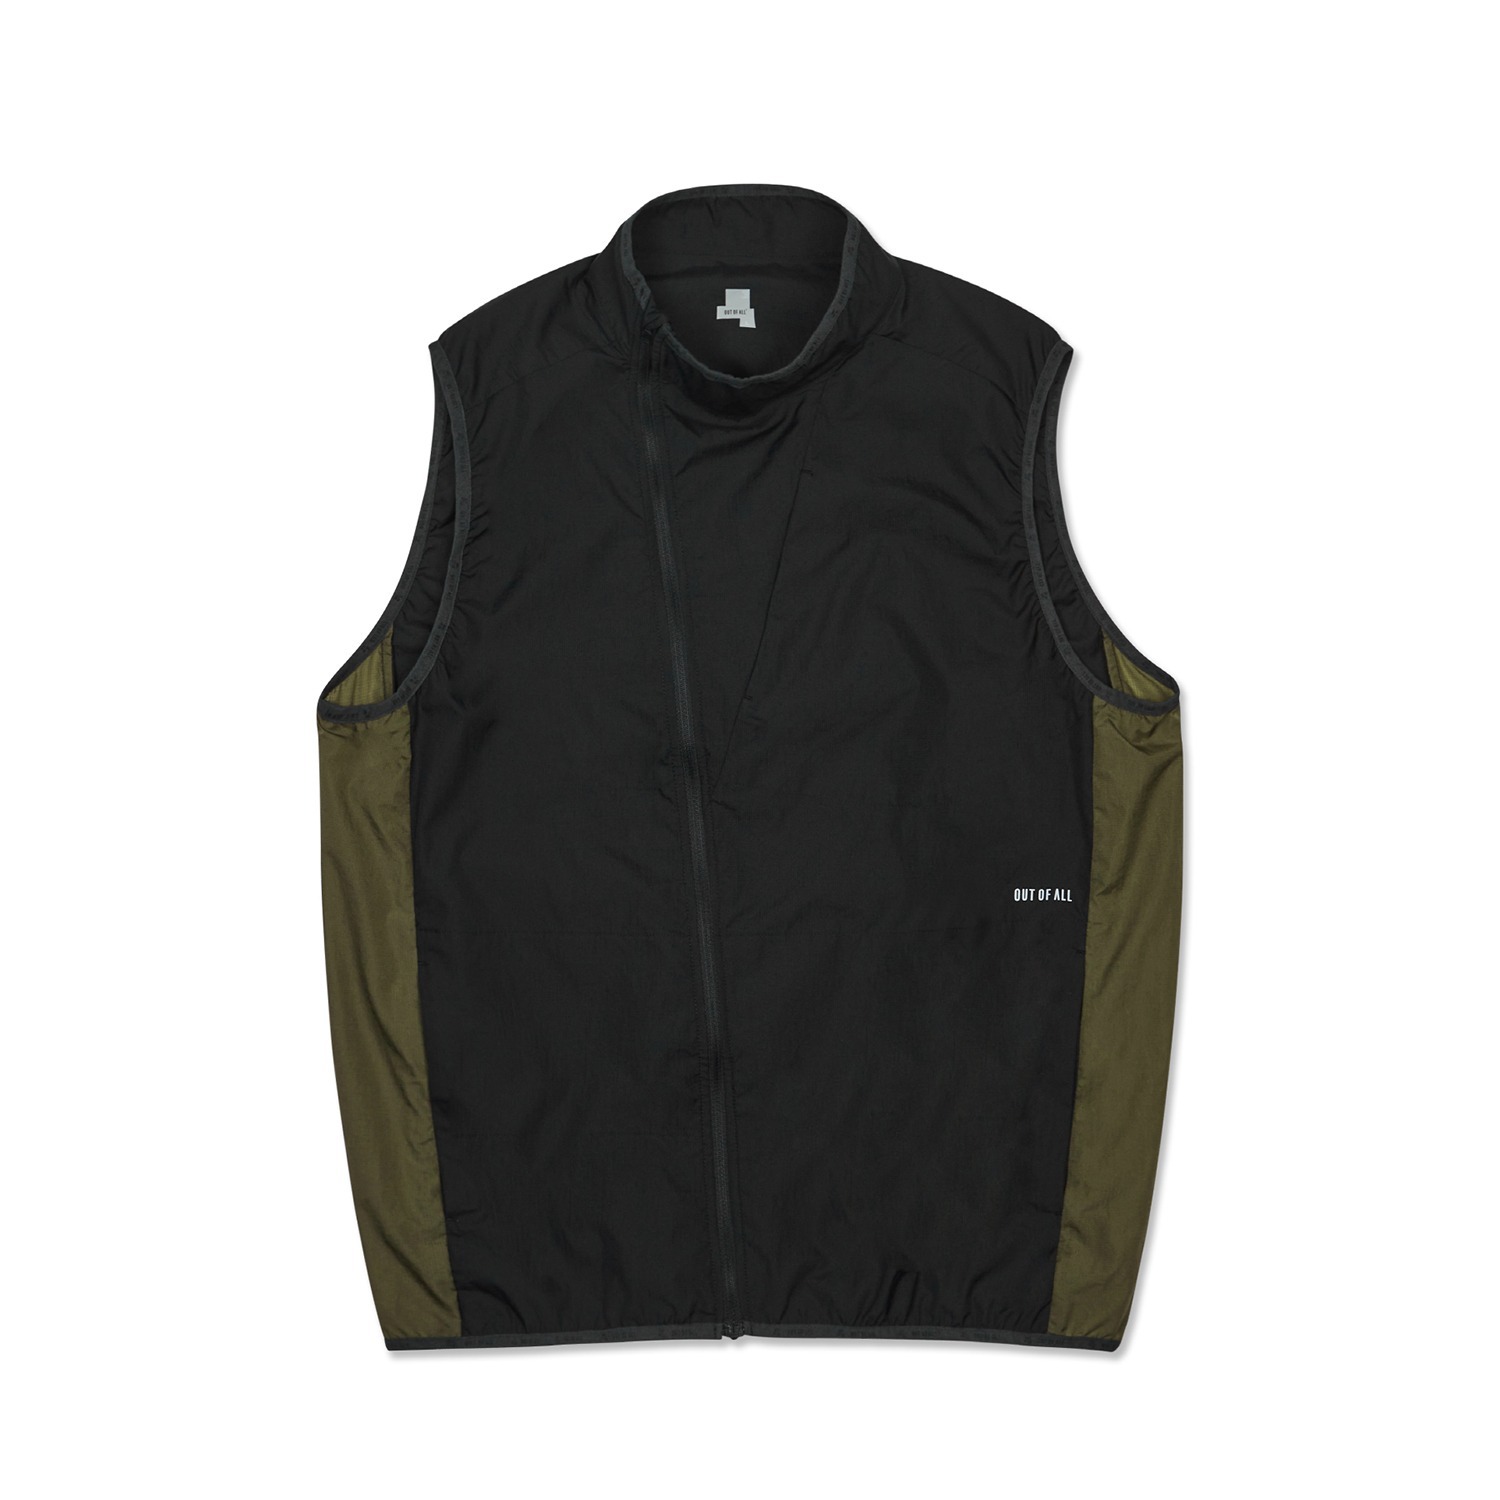 OUT OF ALL LIMONTA PACKABLE WINDSHELL VEST-BLACK[아웃오브올 리몬타 패커블 윈드쉘 베스트-블랙]